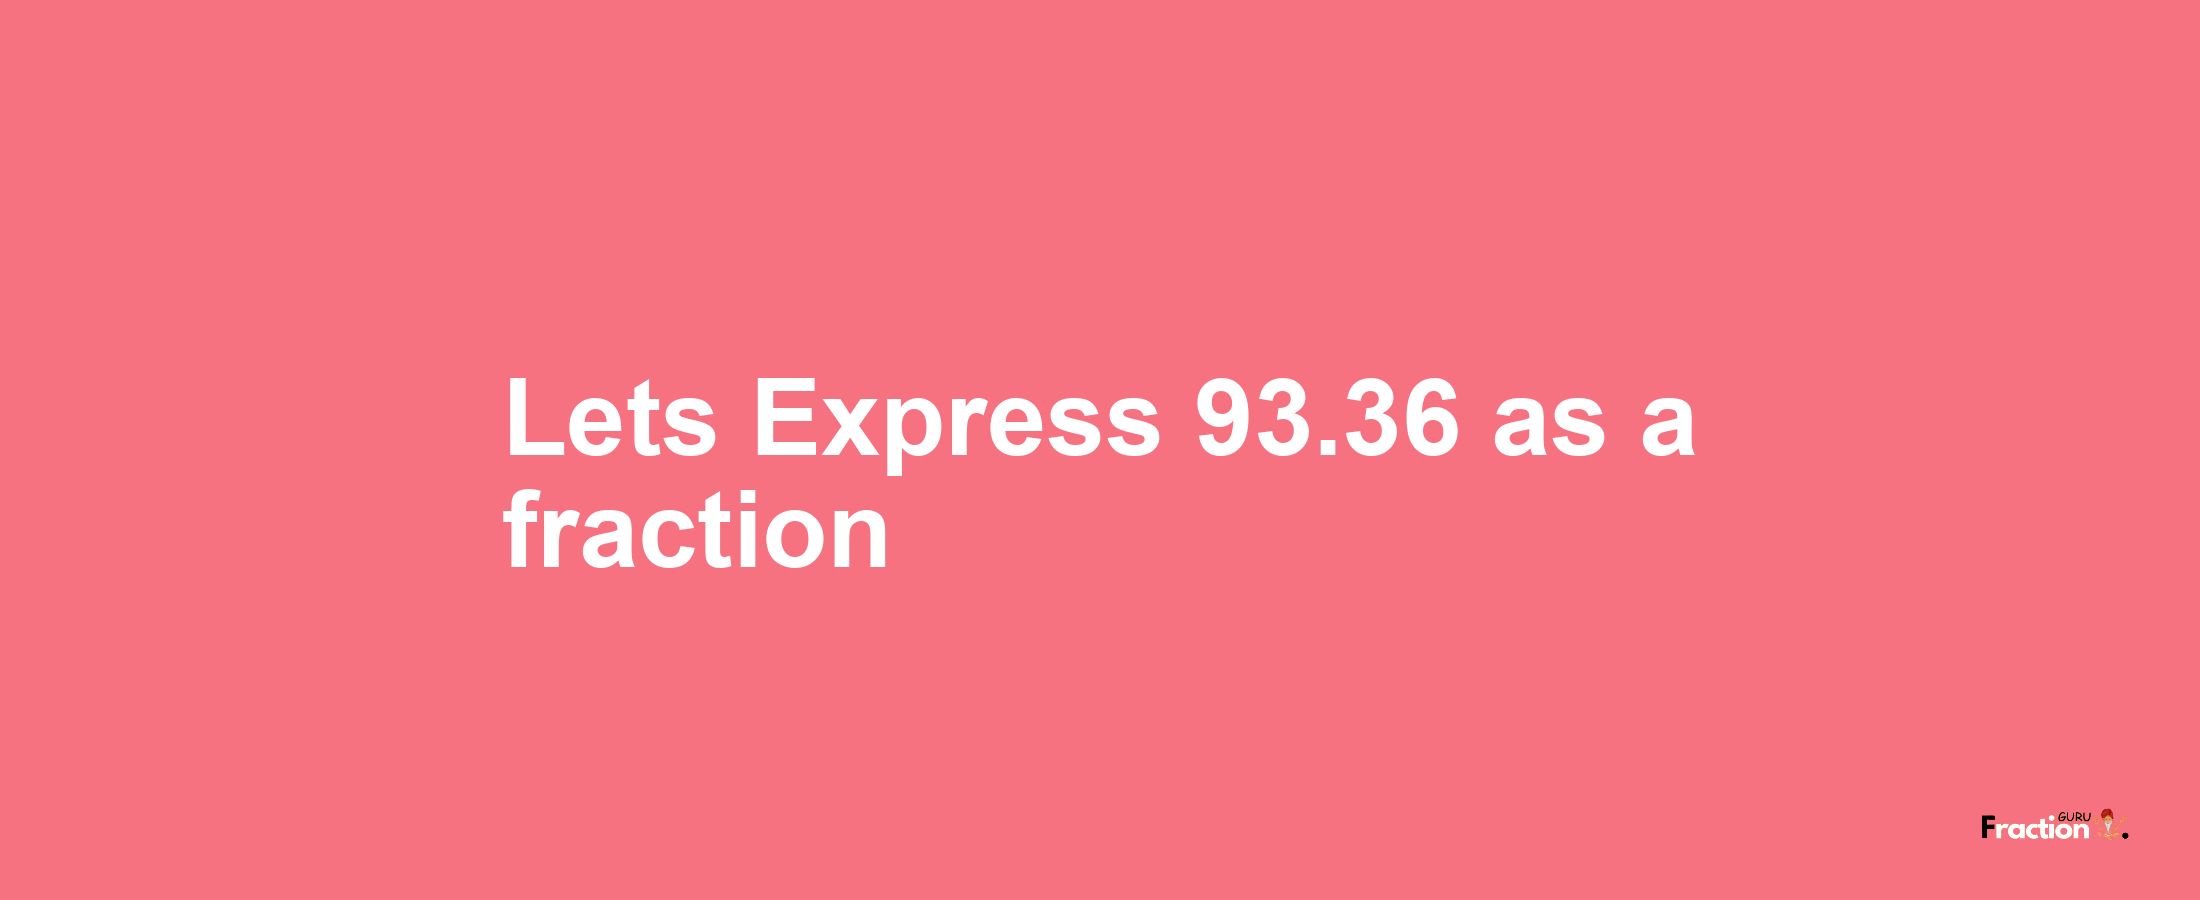 Lets Express 93.36 as afraction